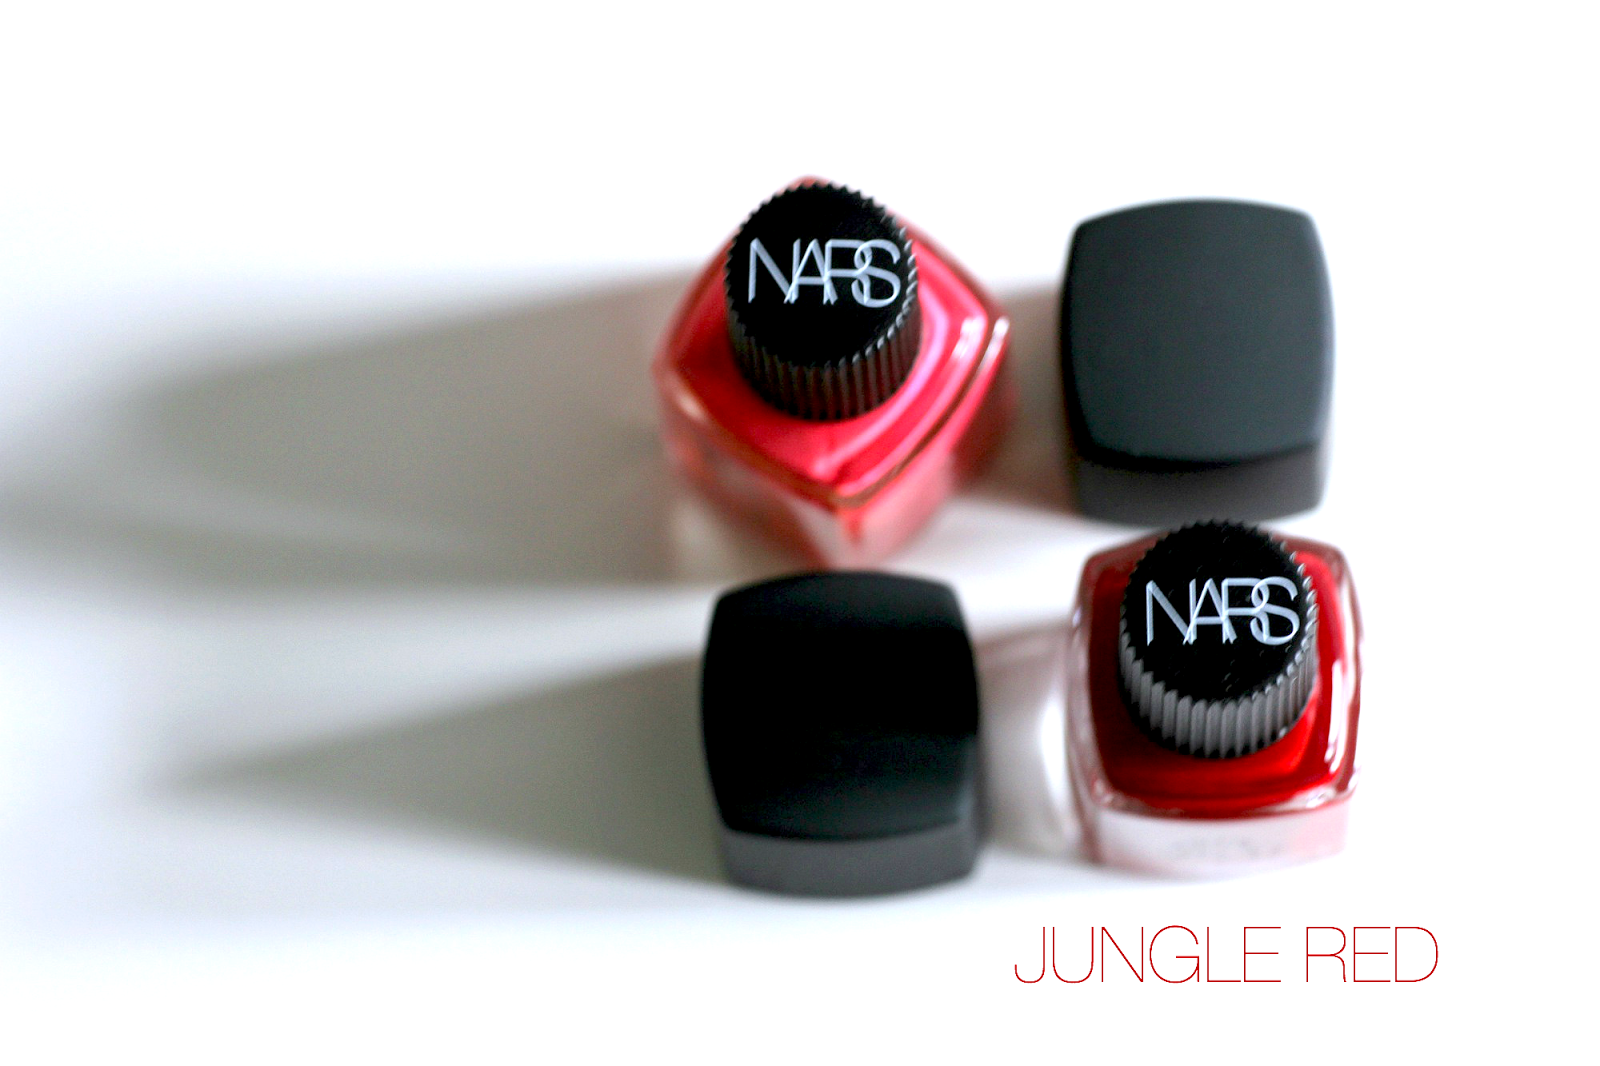 2. NARS Nail Polish in "Jungle Red" - wide 2